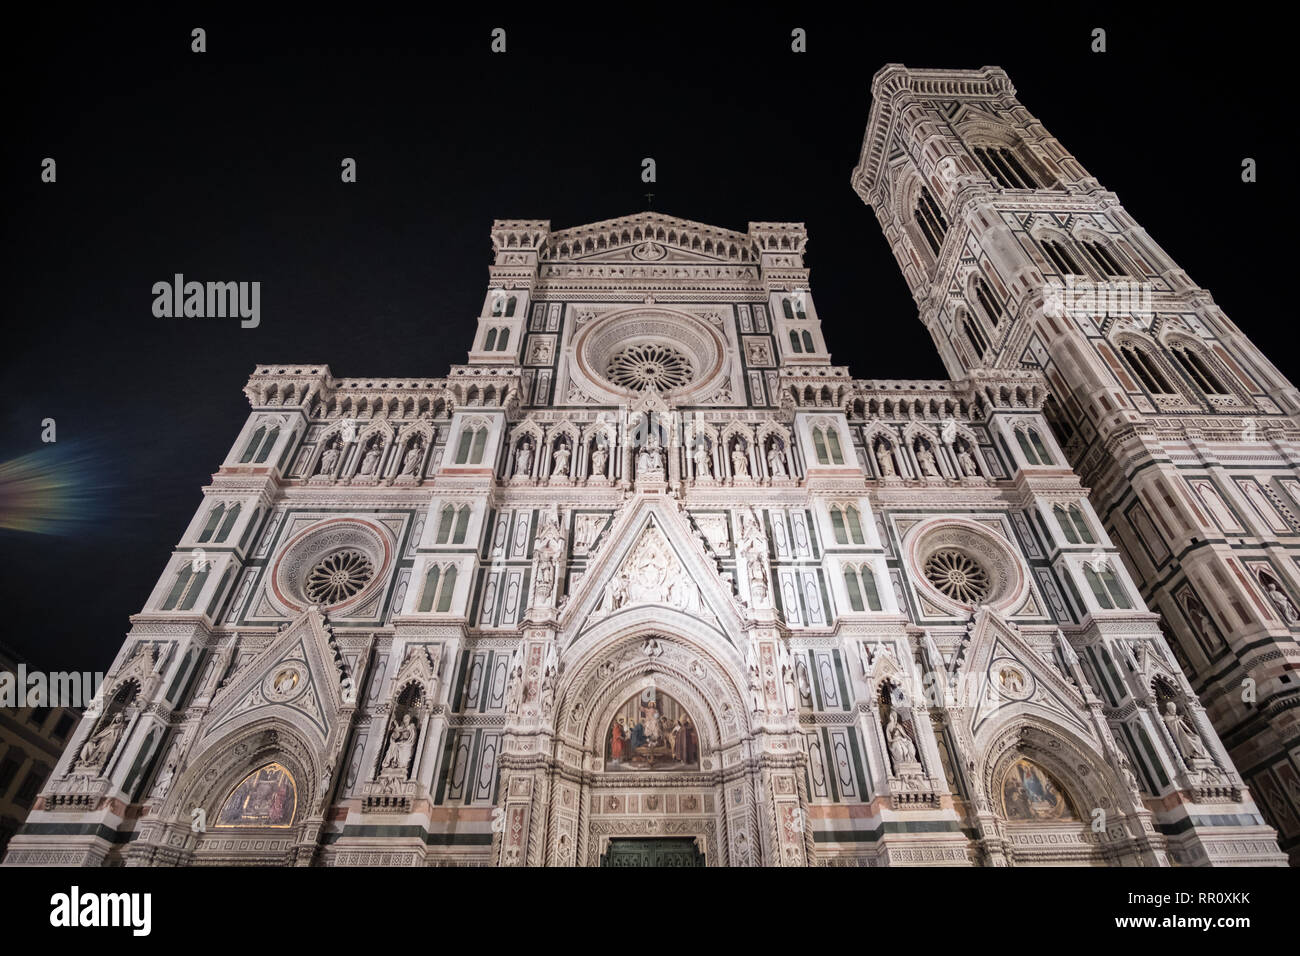 Detail of Florence Duomo Cathedral. at night Stock Photo